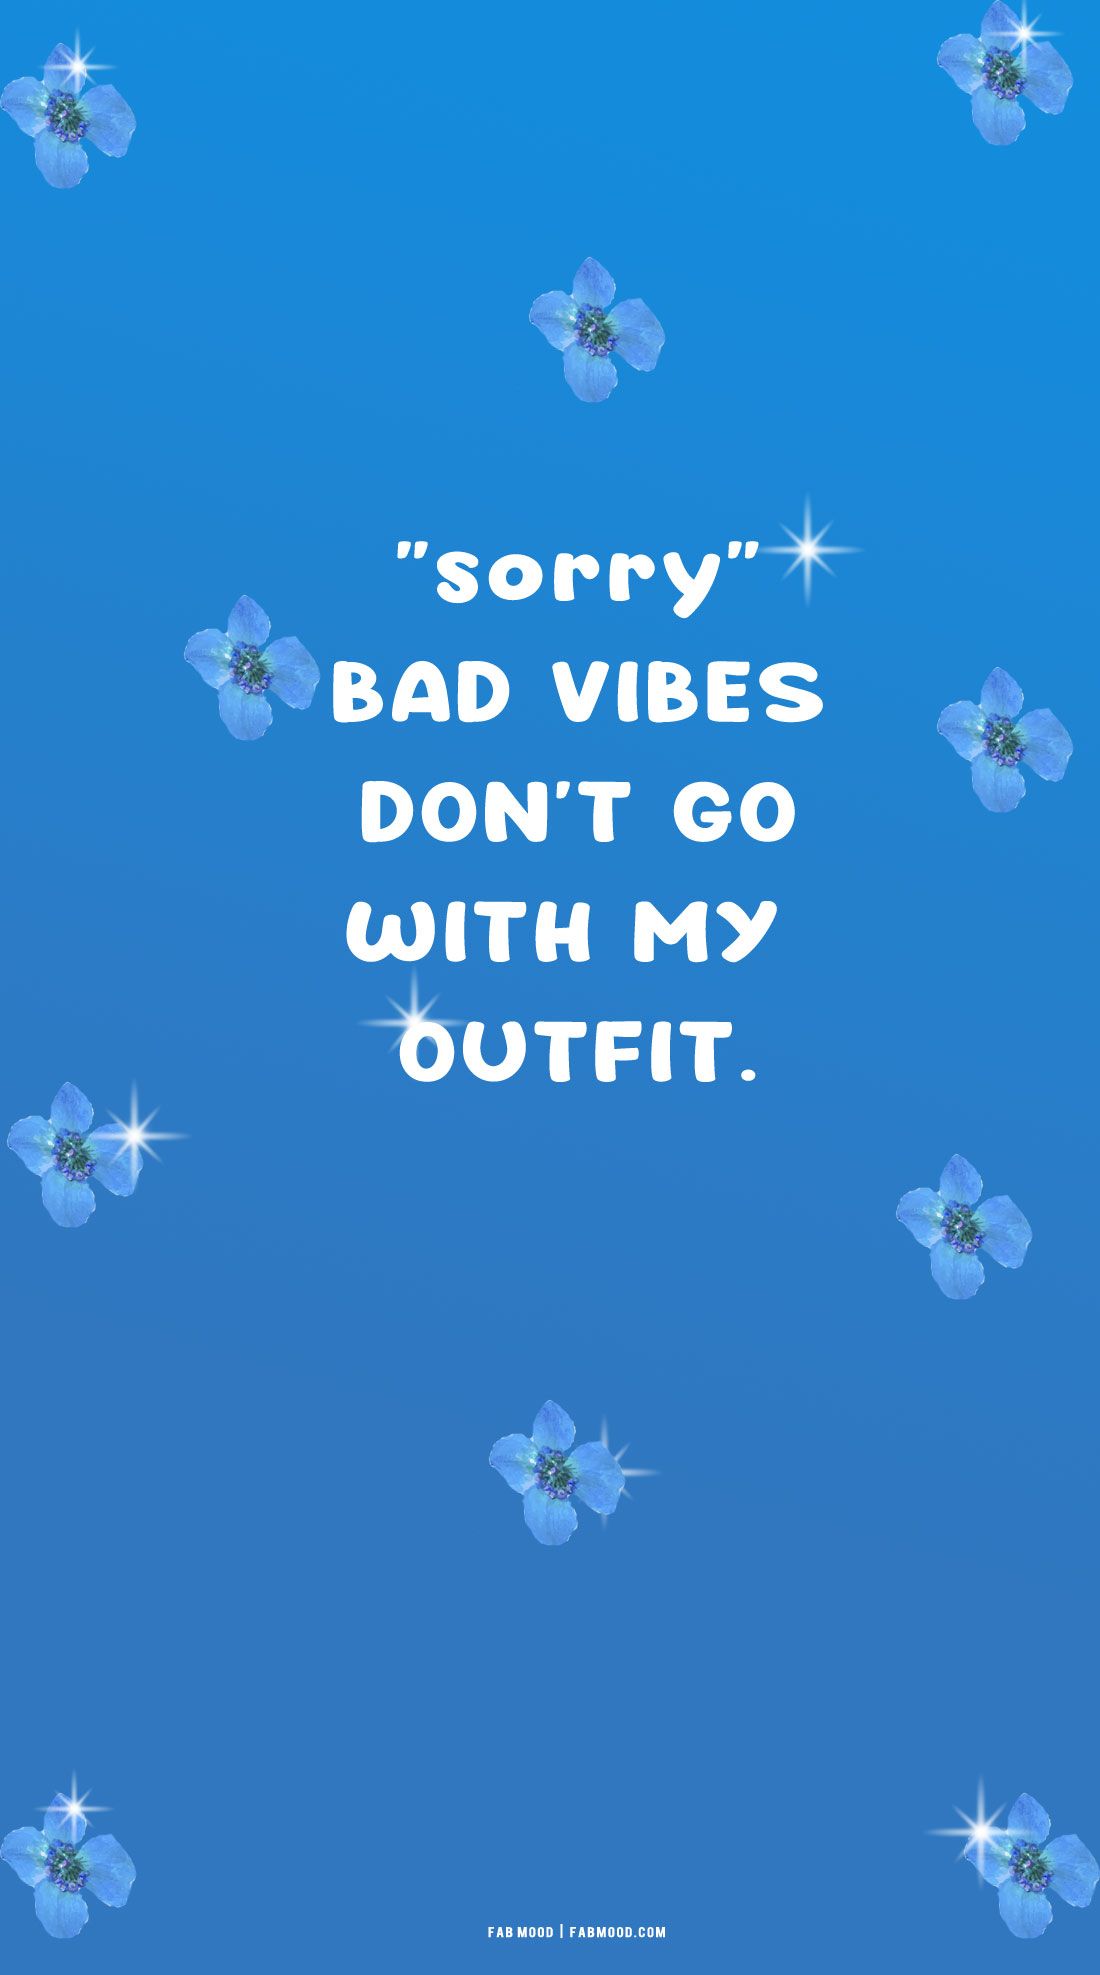 Azure Blue Wallpaper For Phone : Bad Vibes Don't Go With My Outfit